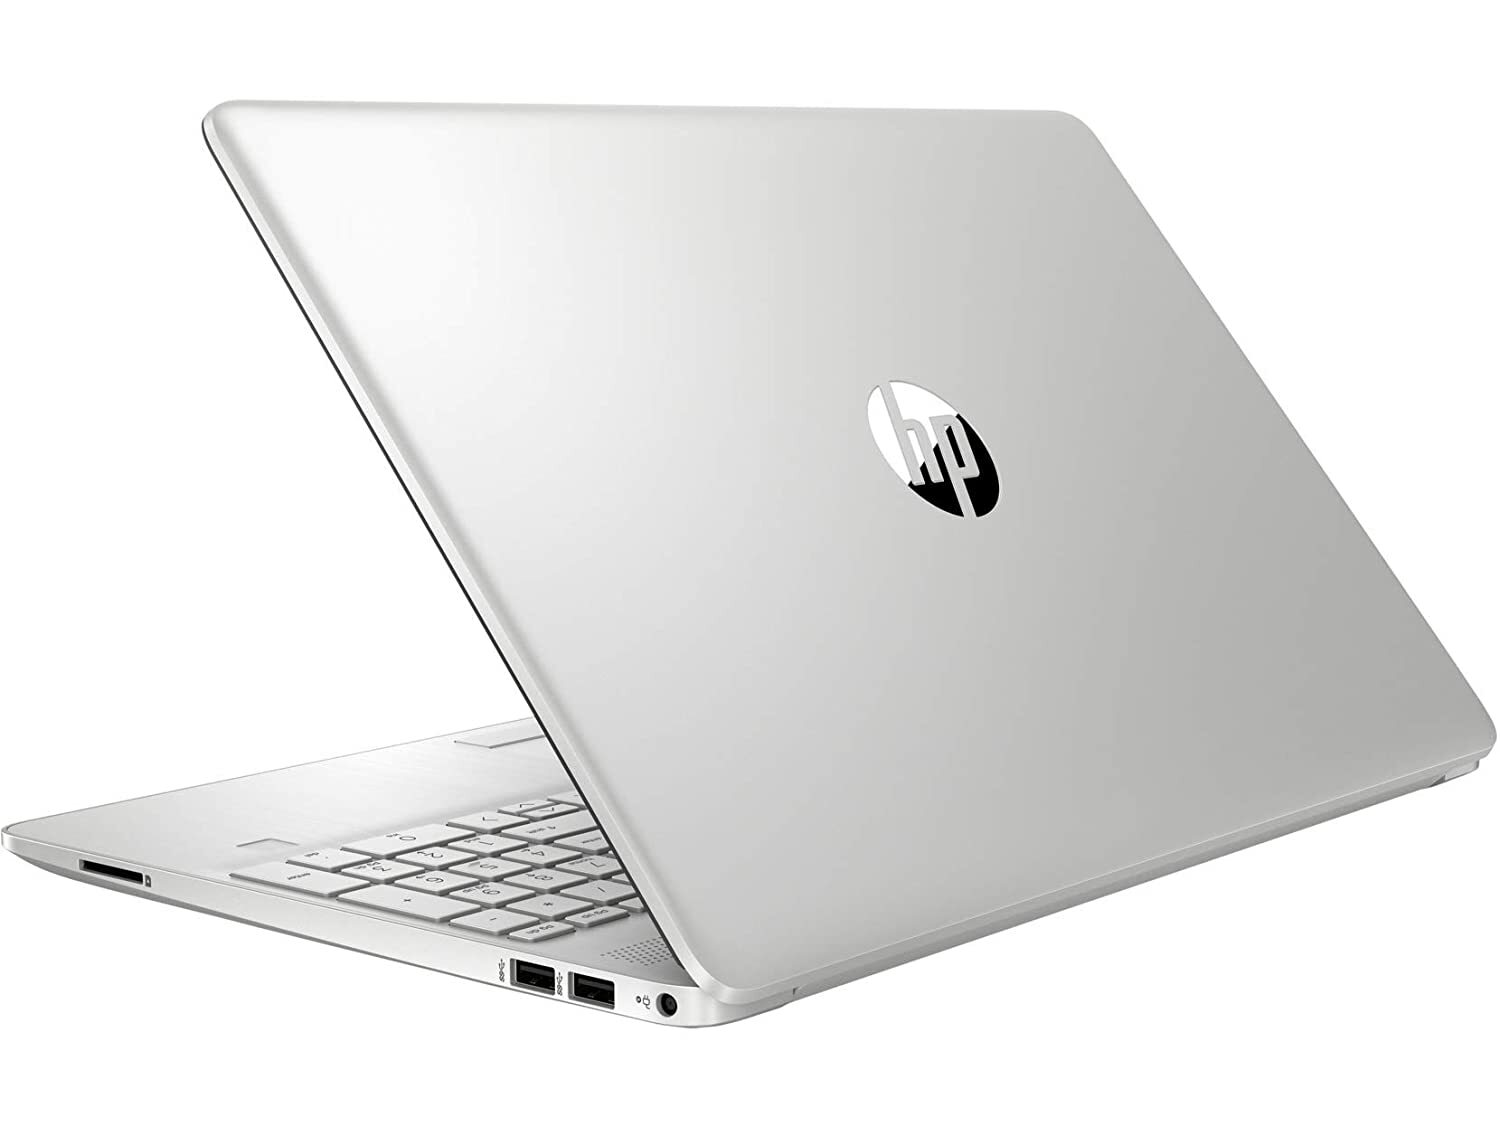 HP 15s-du2040tu 15-inch Laptop (i5-1035G1/8GB/1TB HDD/Windows 10 Home/Integrated Graphics), Natural Silver